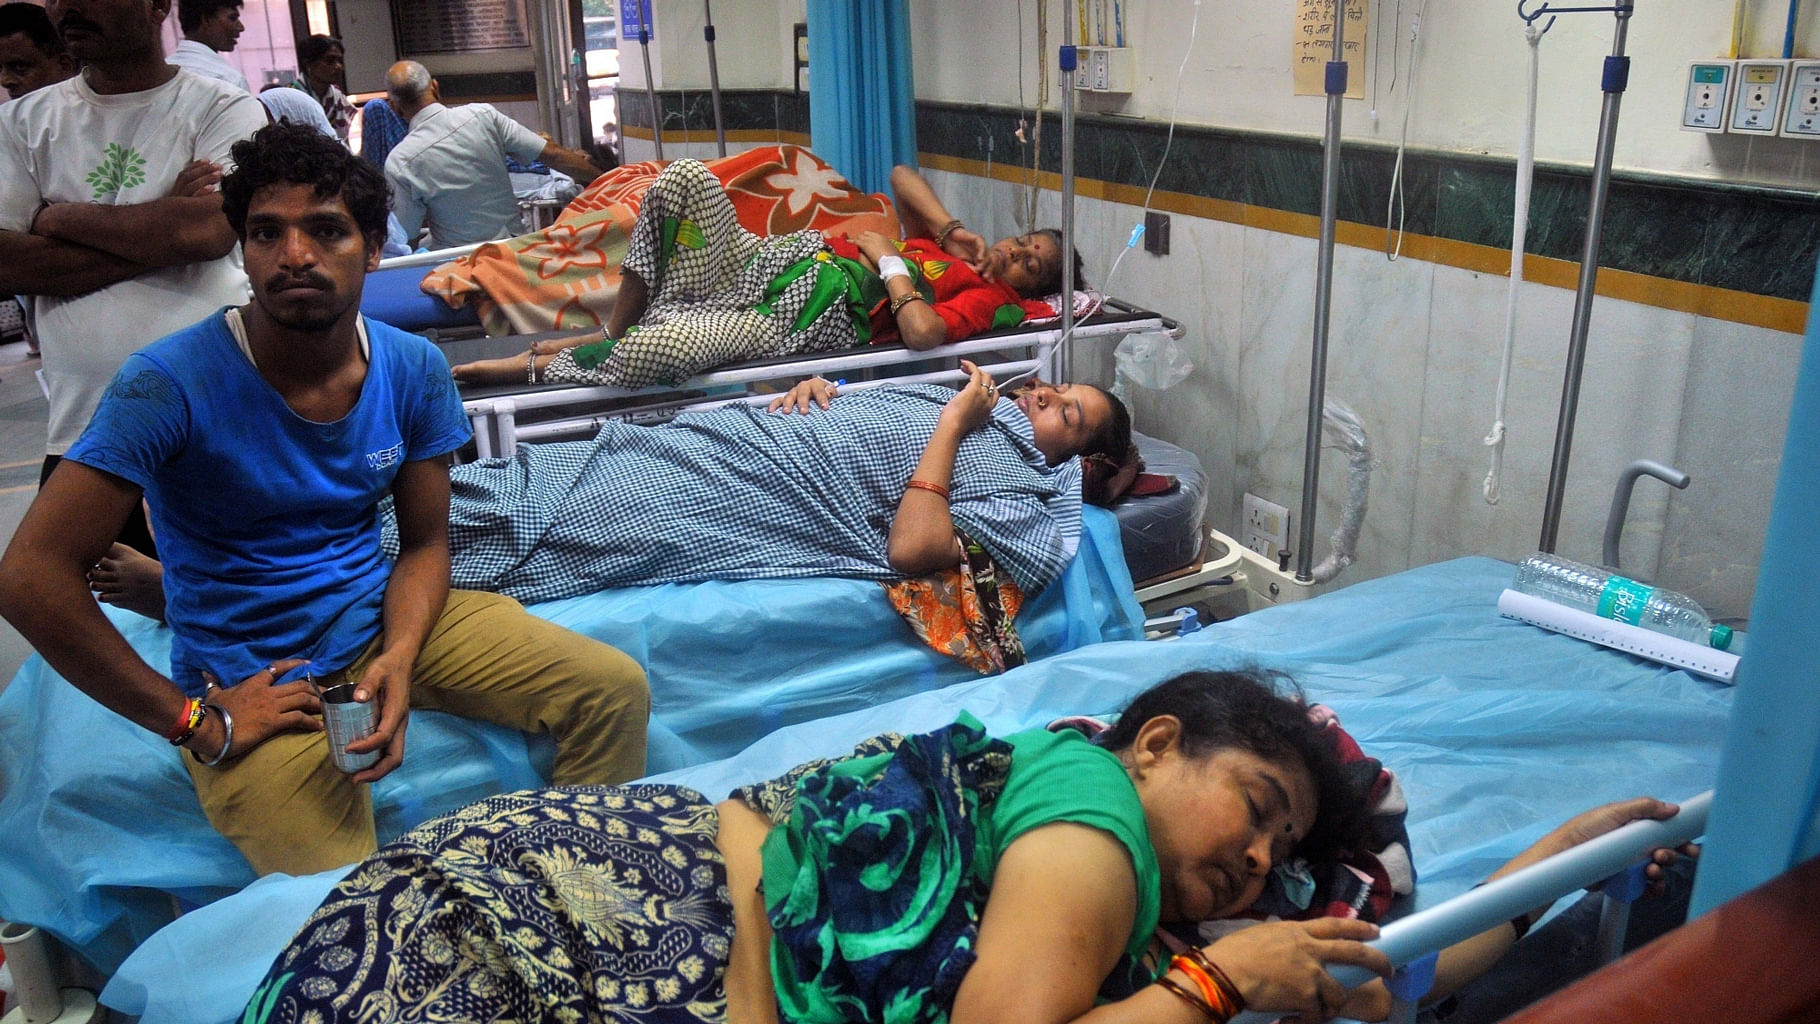  People suffering from dengue and chikungunya being treated at a Delhi hospital on 31 Aug, 2016. (Photo: IANS)